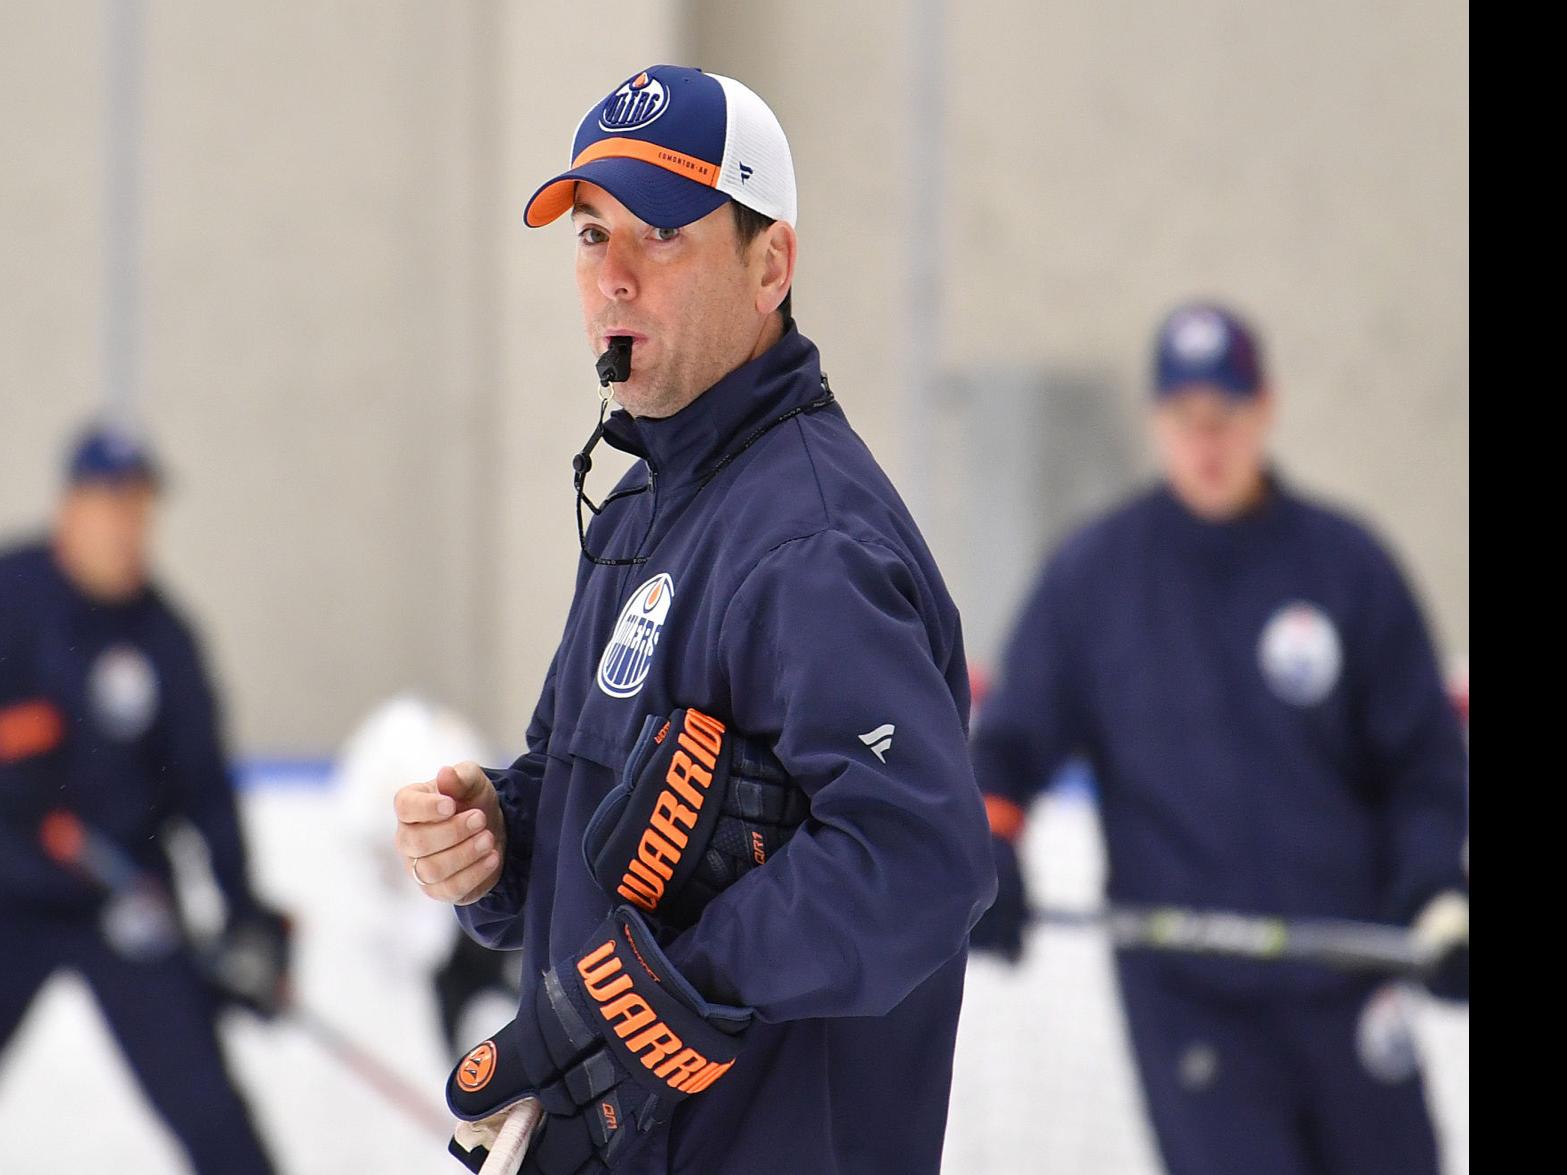 Komets legend Chaulk takes over as head coach of AHL's Bakersfield